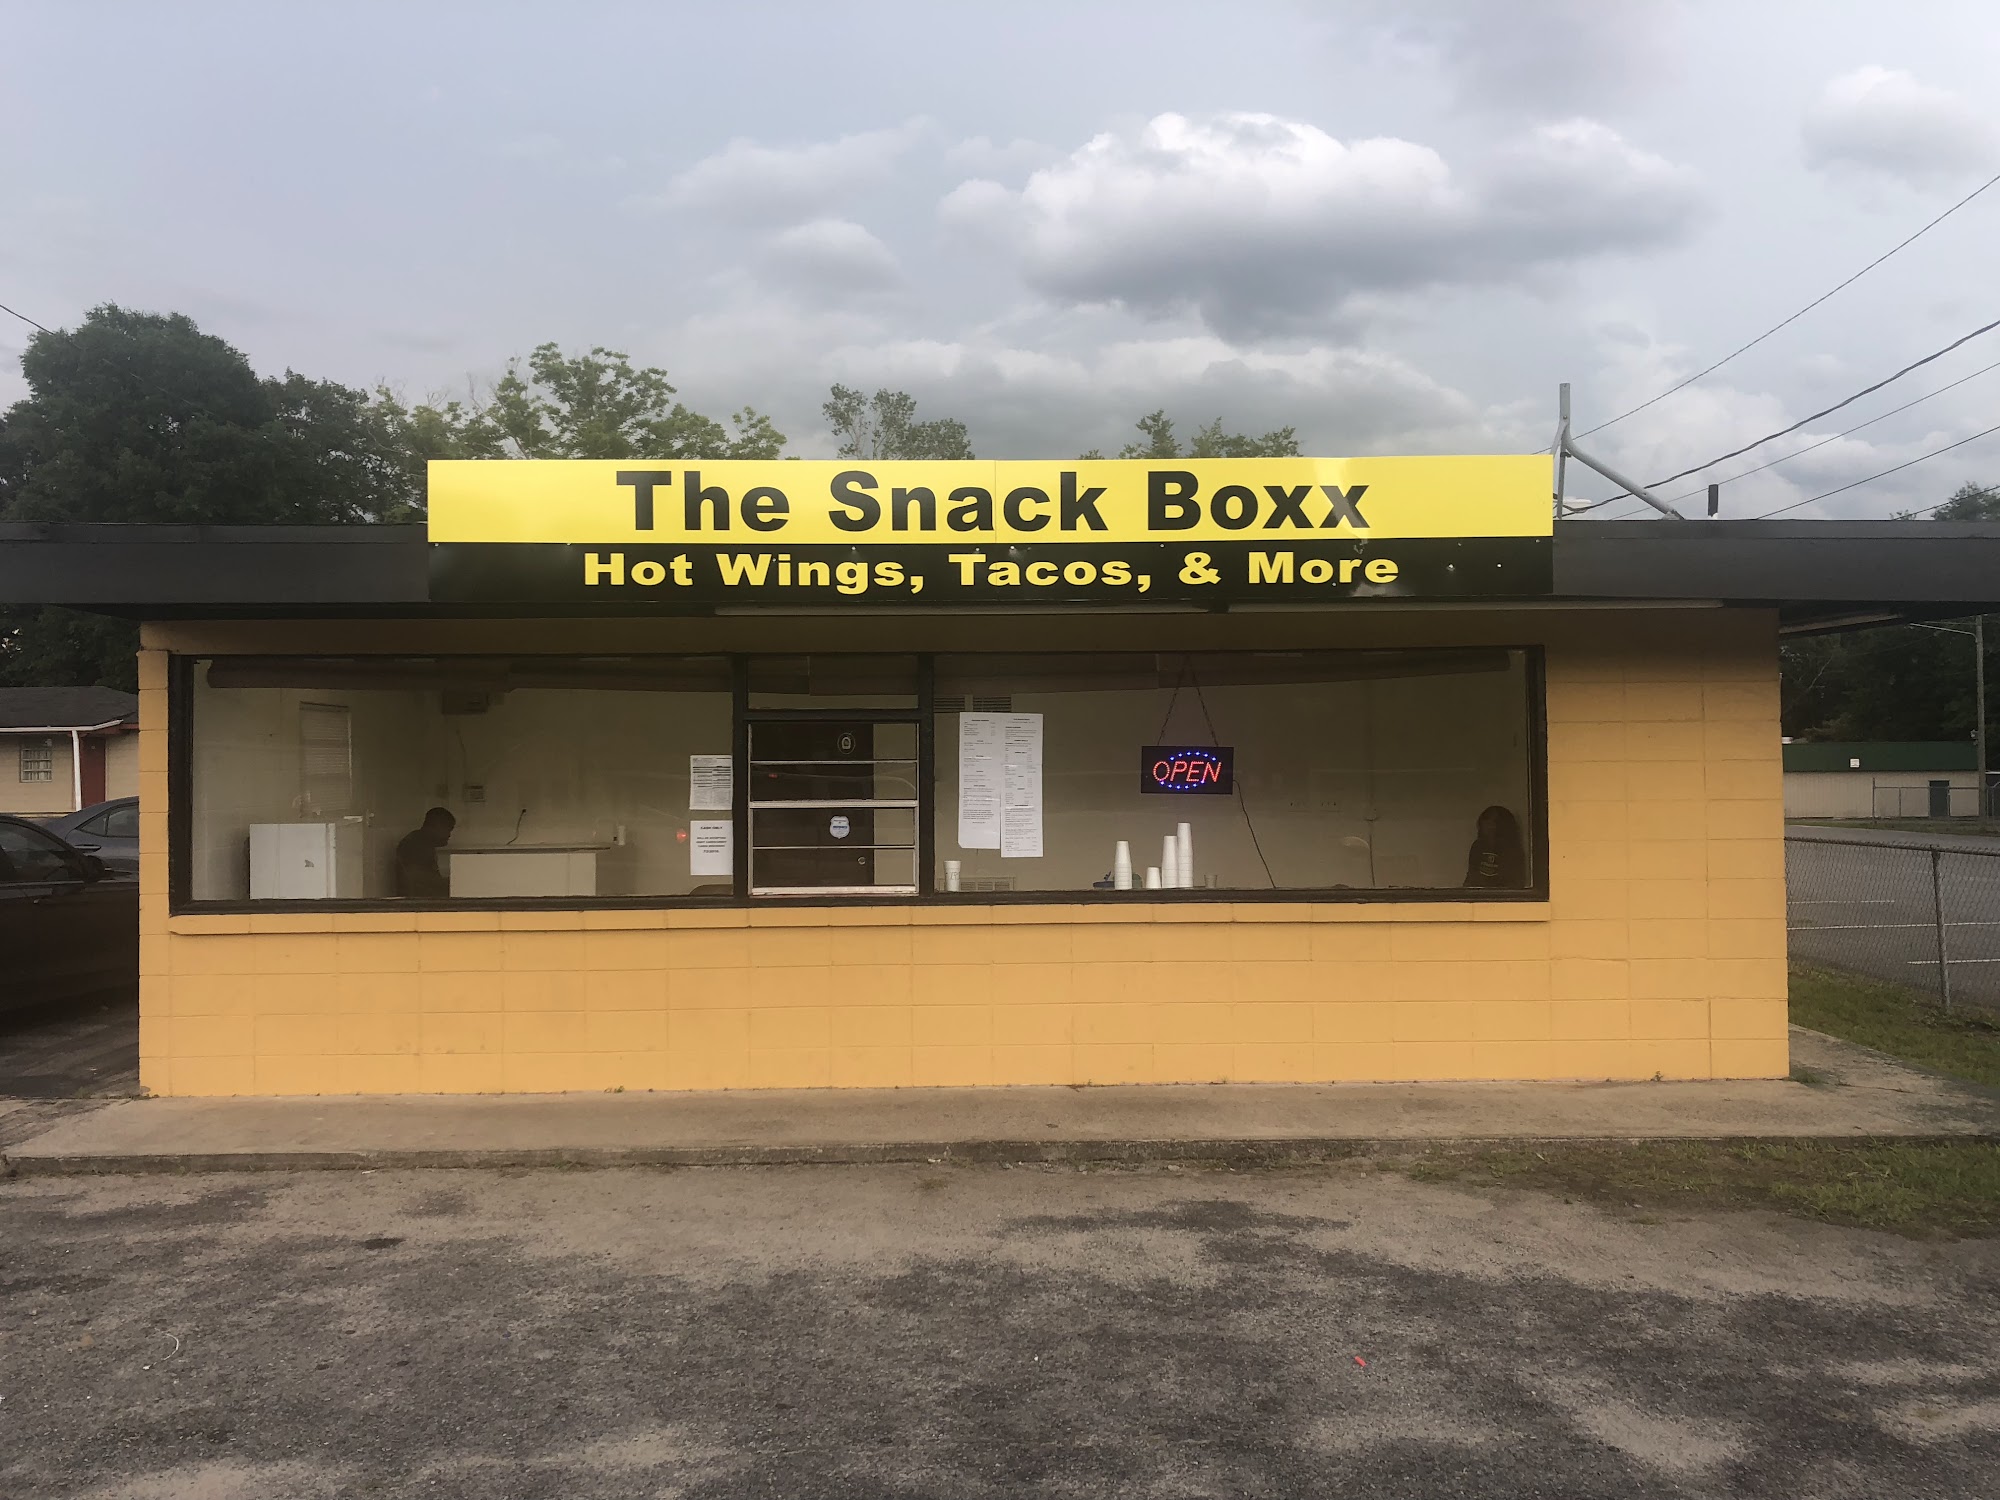 The Snack Boxx